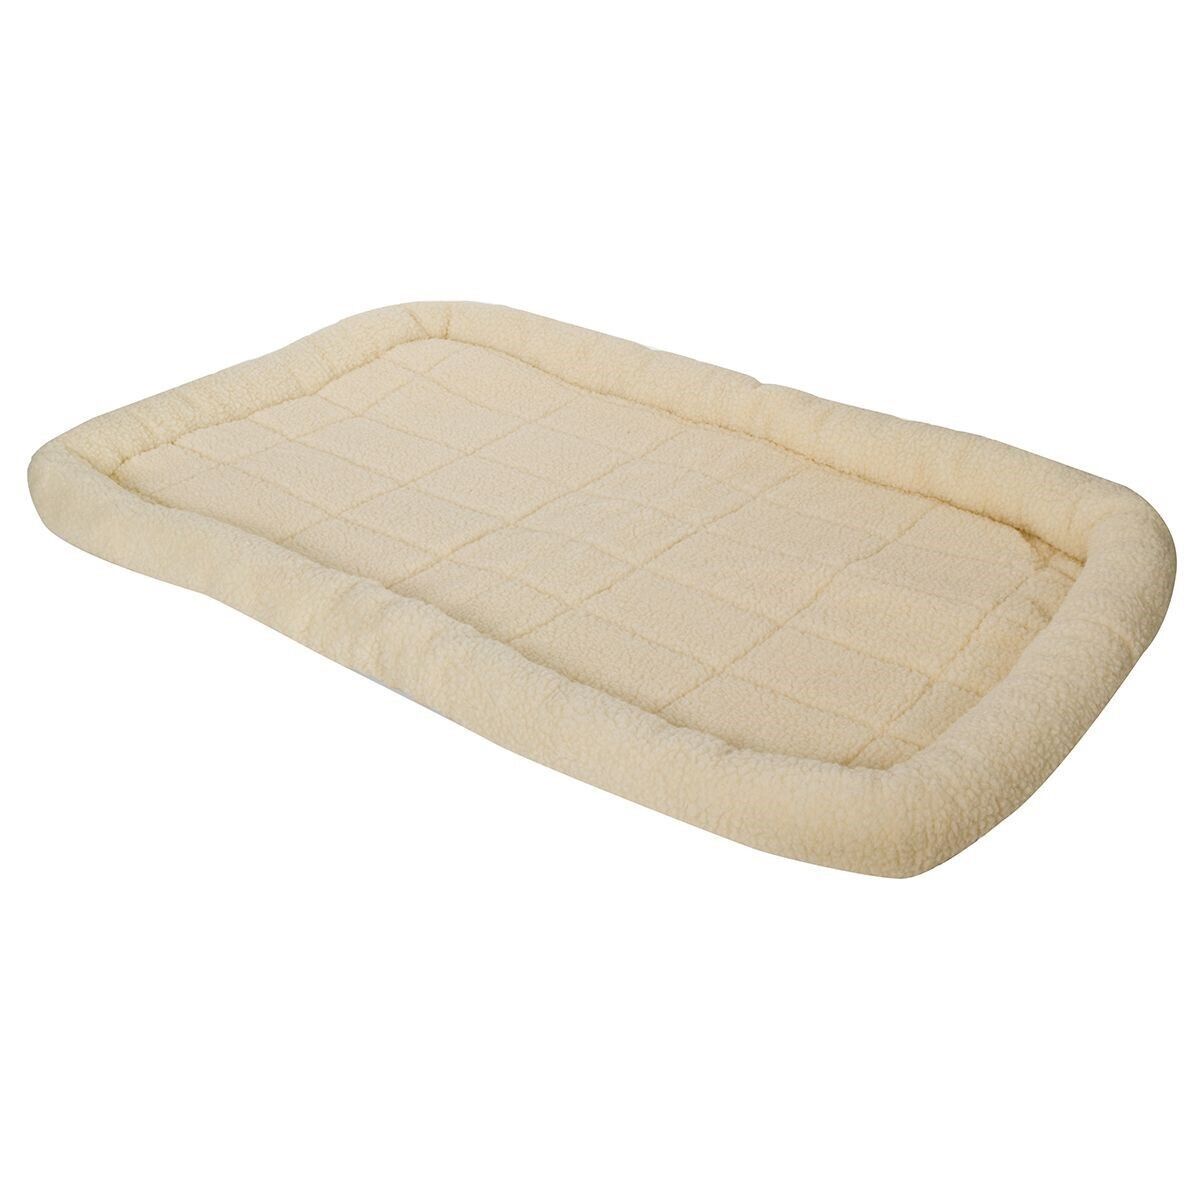 Primary image for Pet Lodge Fleece Dog Bed Giant 47in